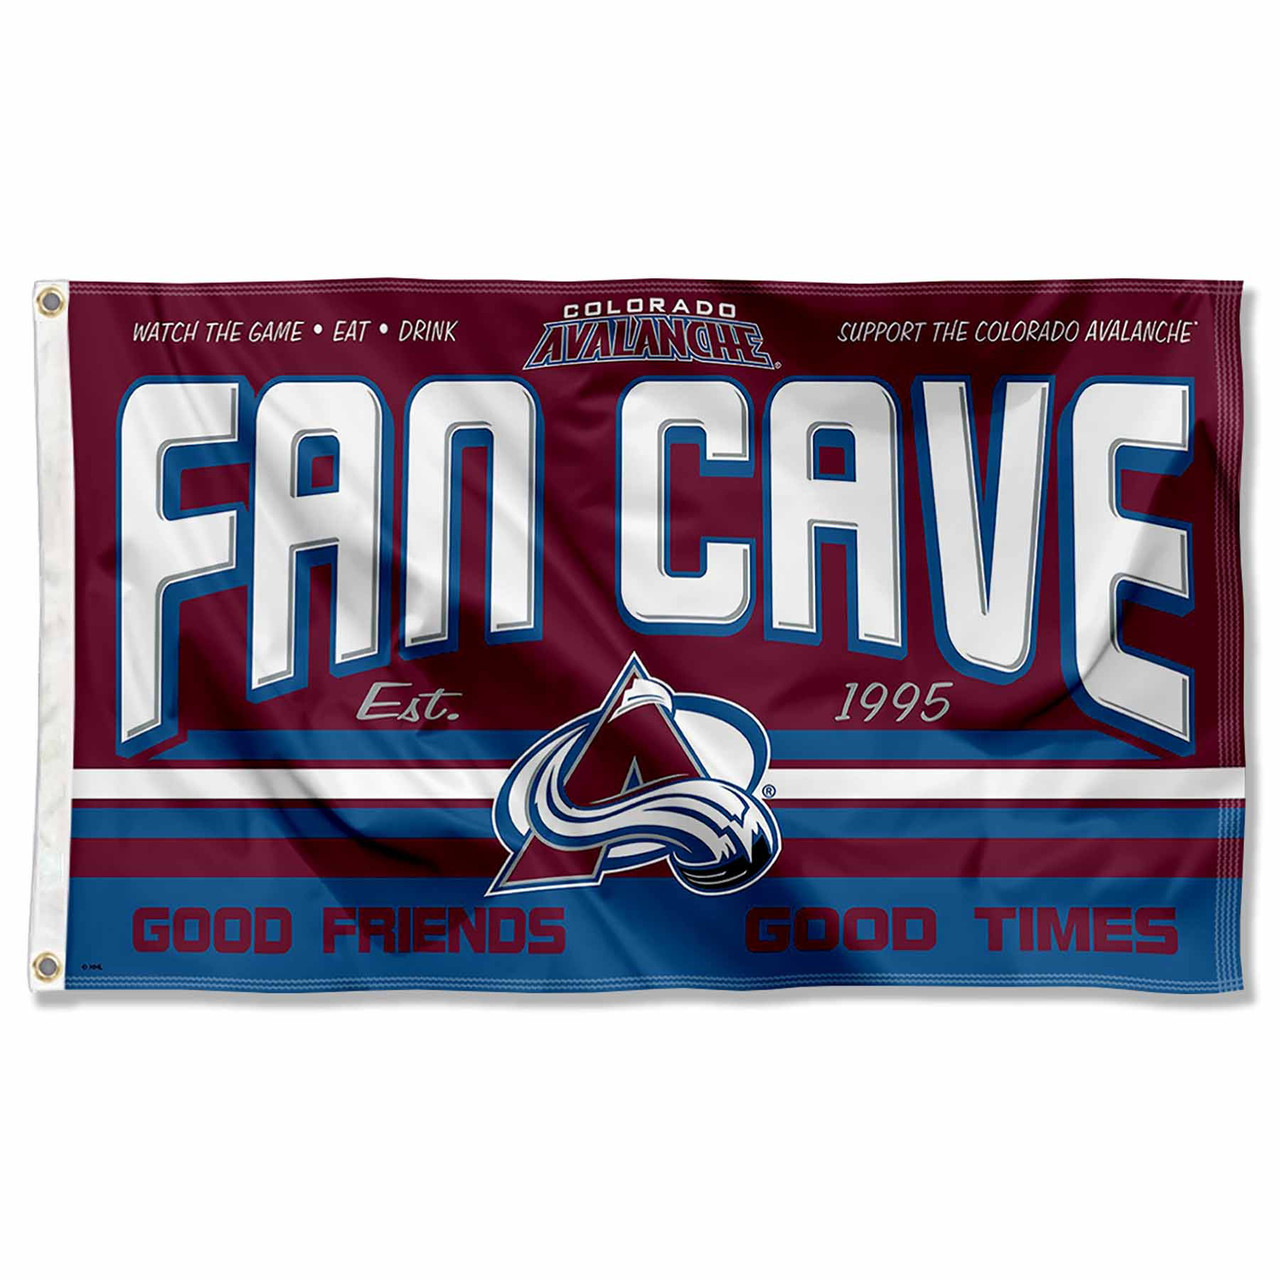 Colorado Avalanche banners and flags and other sports banners and